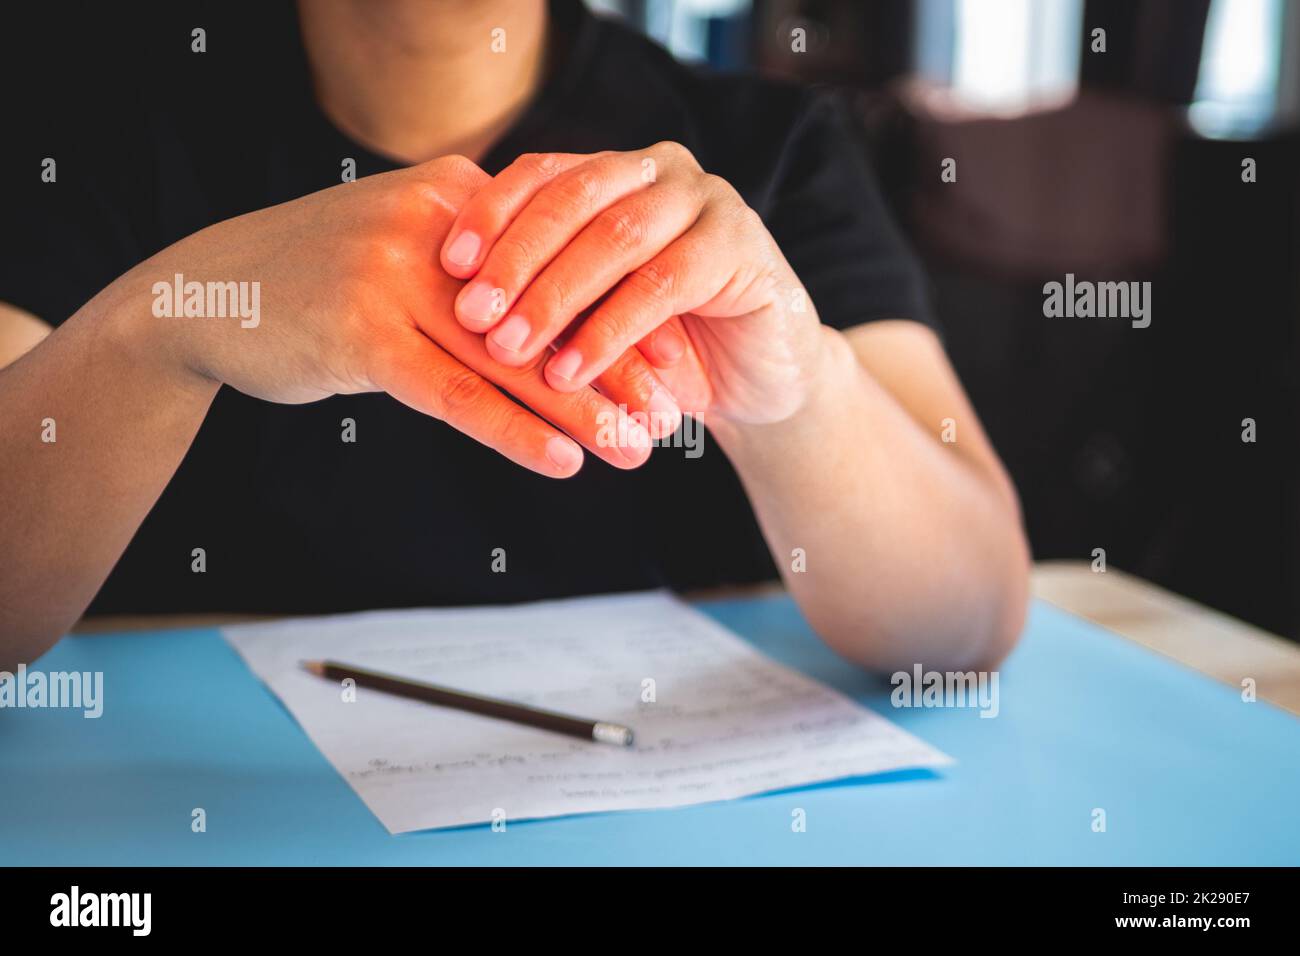 The man works at home. Then his fingers pain. Office syndrome concept. Pain symptom area is shown with red color. Medium close up shot. Stock Photo